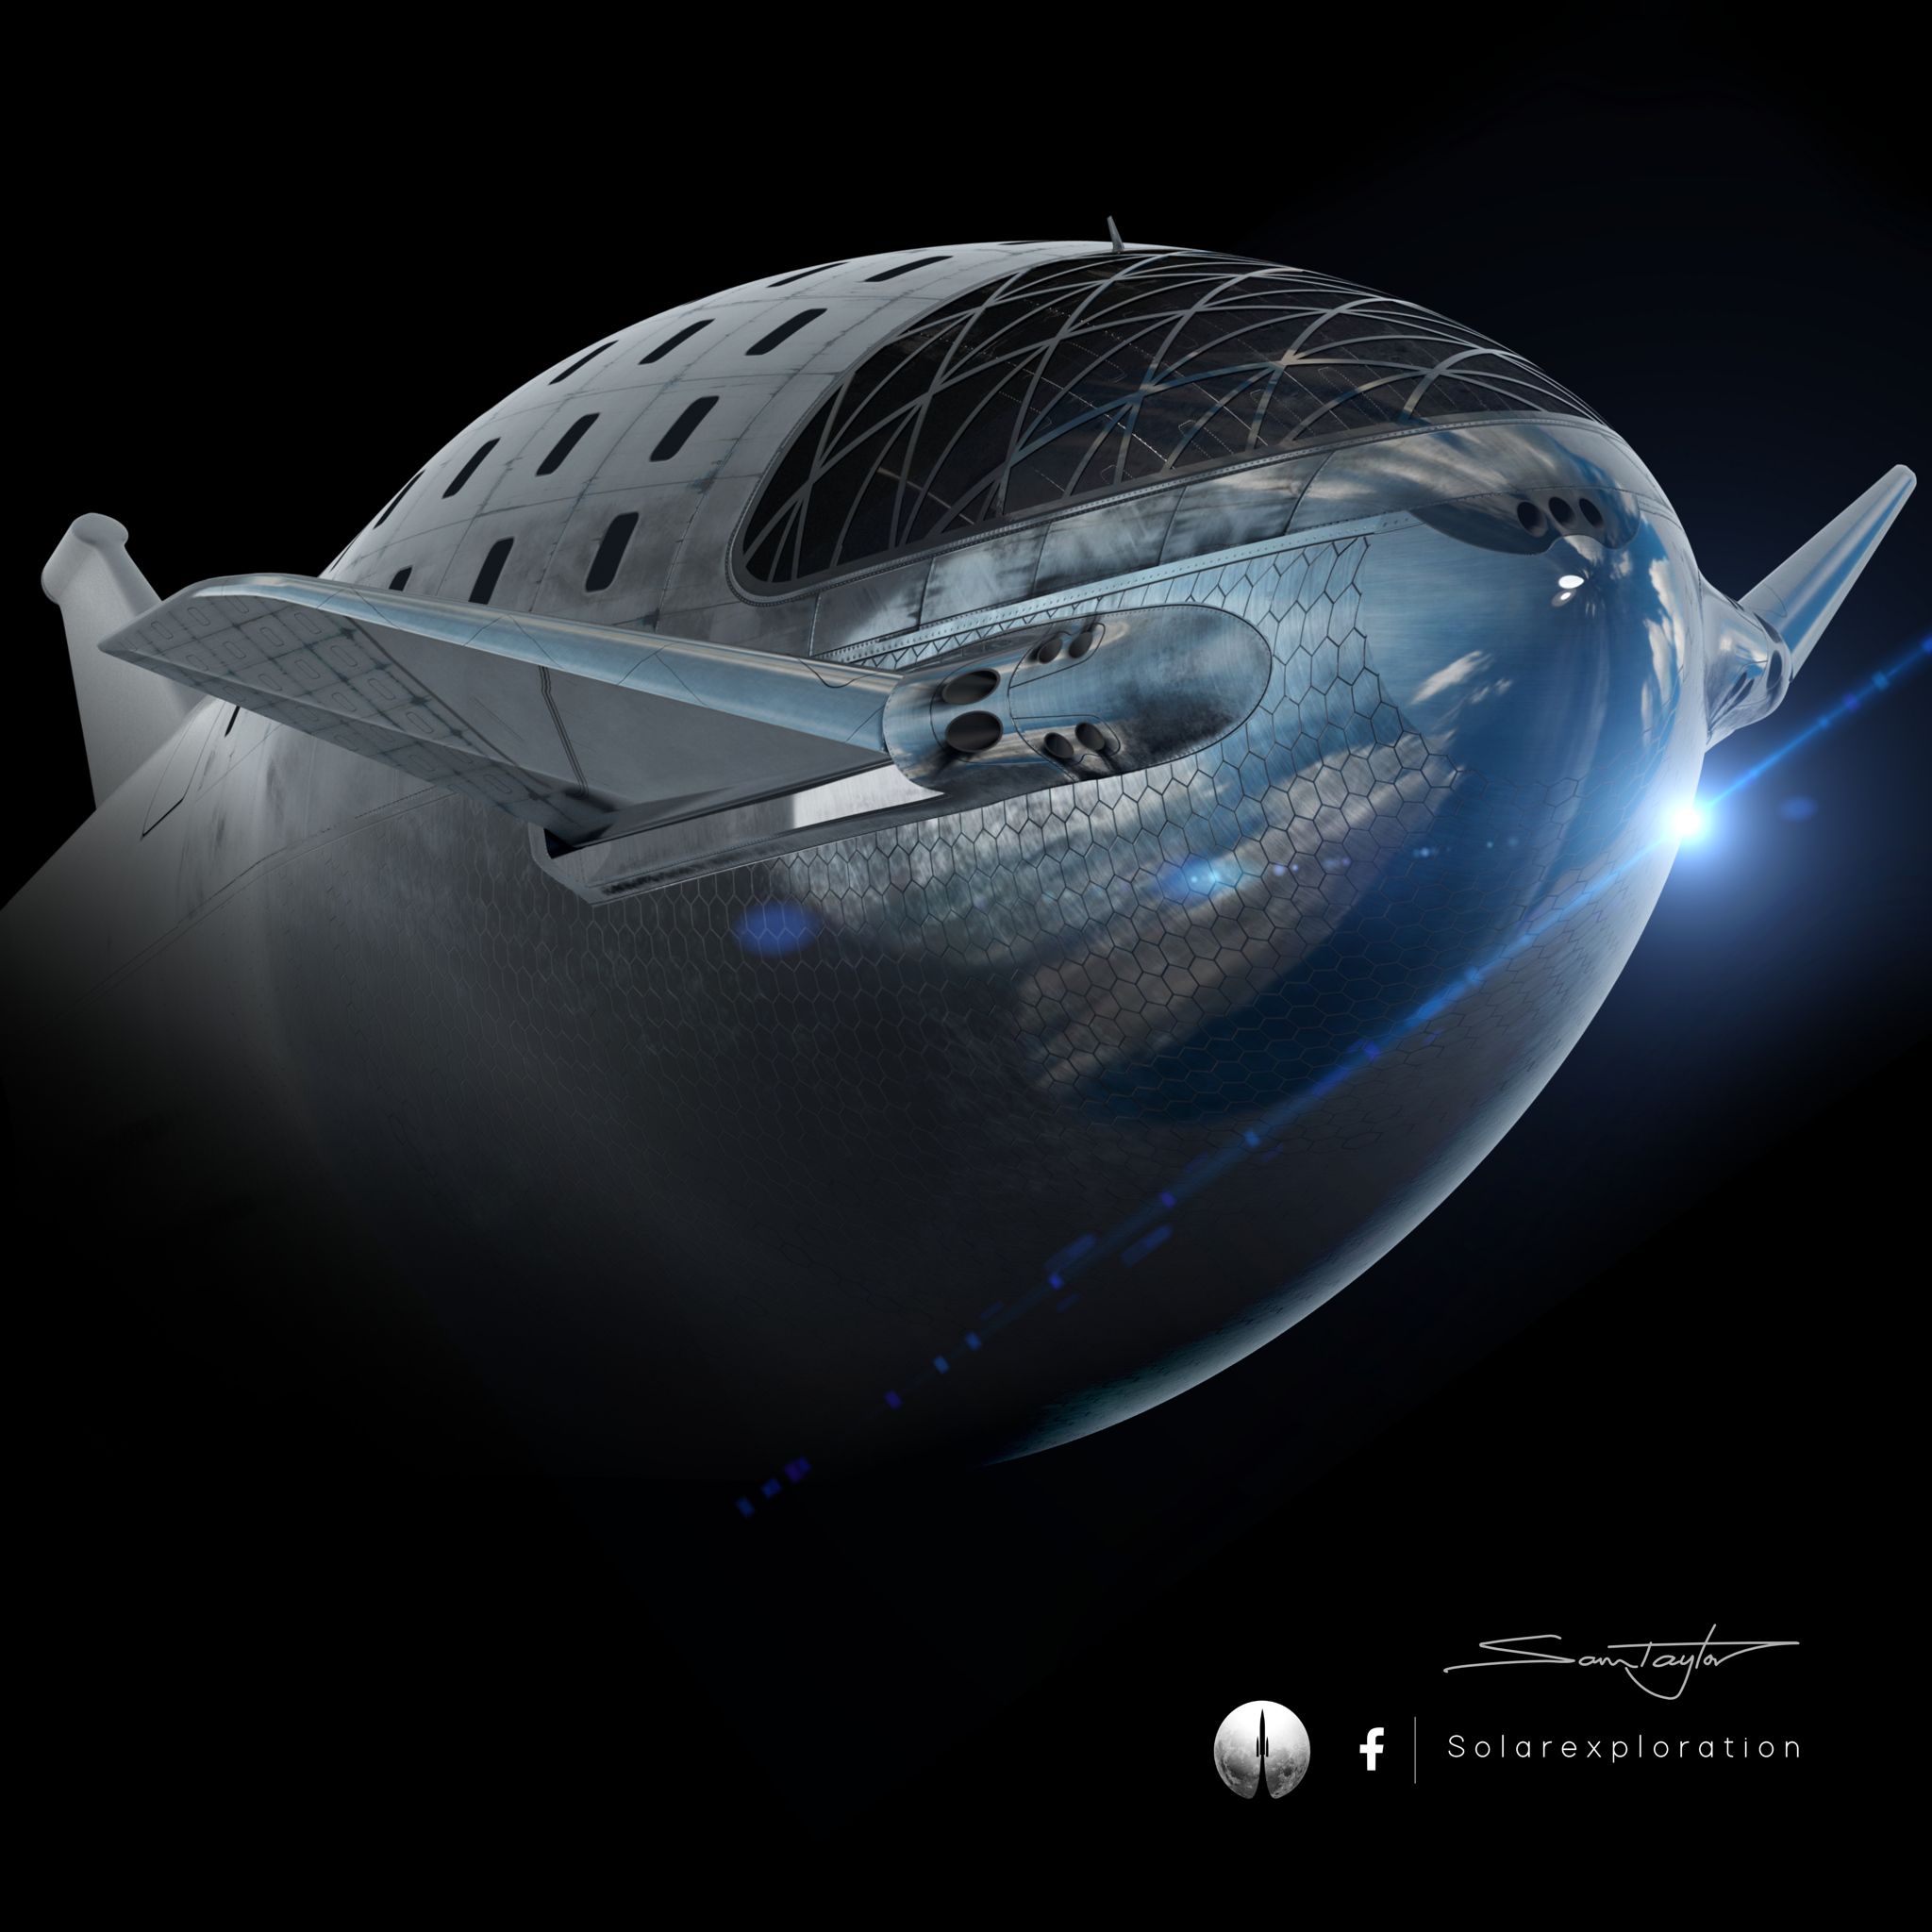 Shiny SpaceX Starship renders